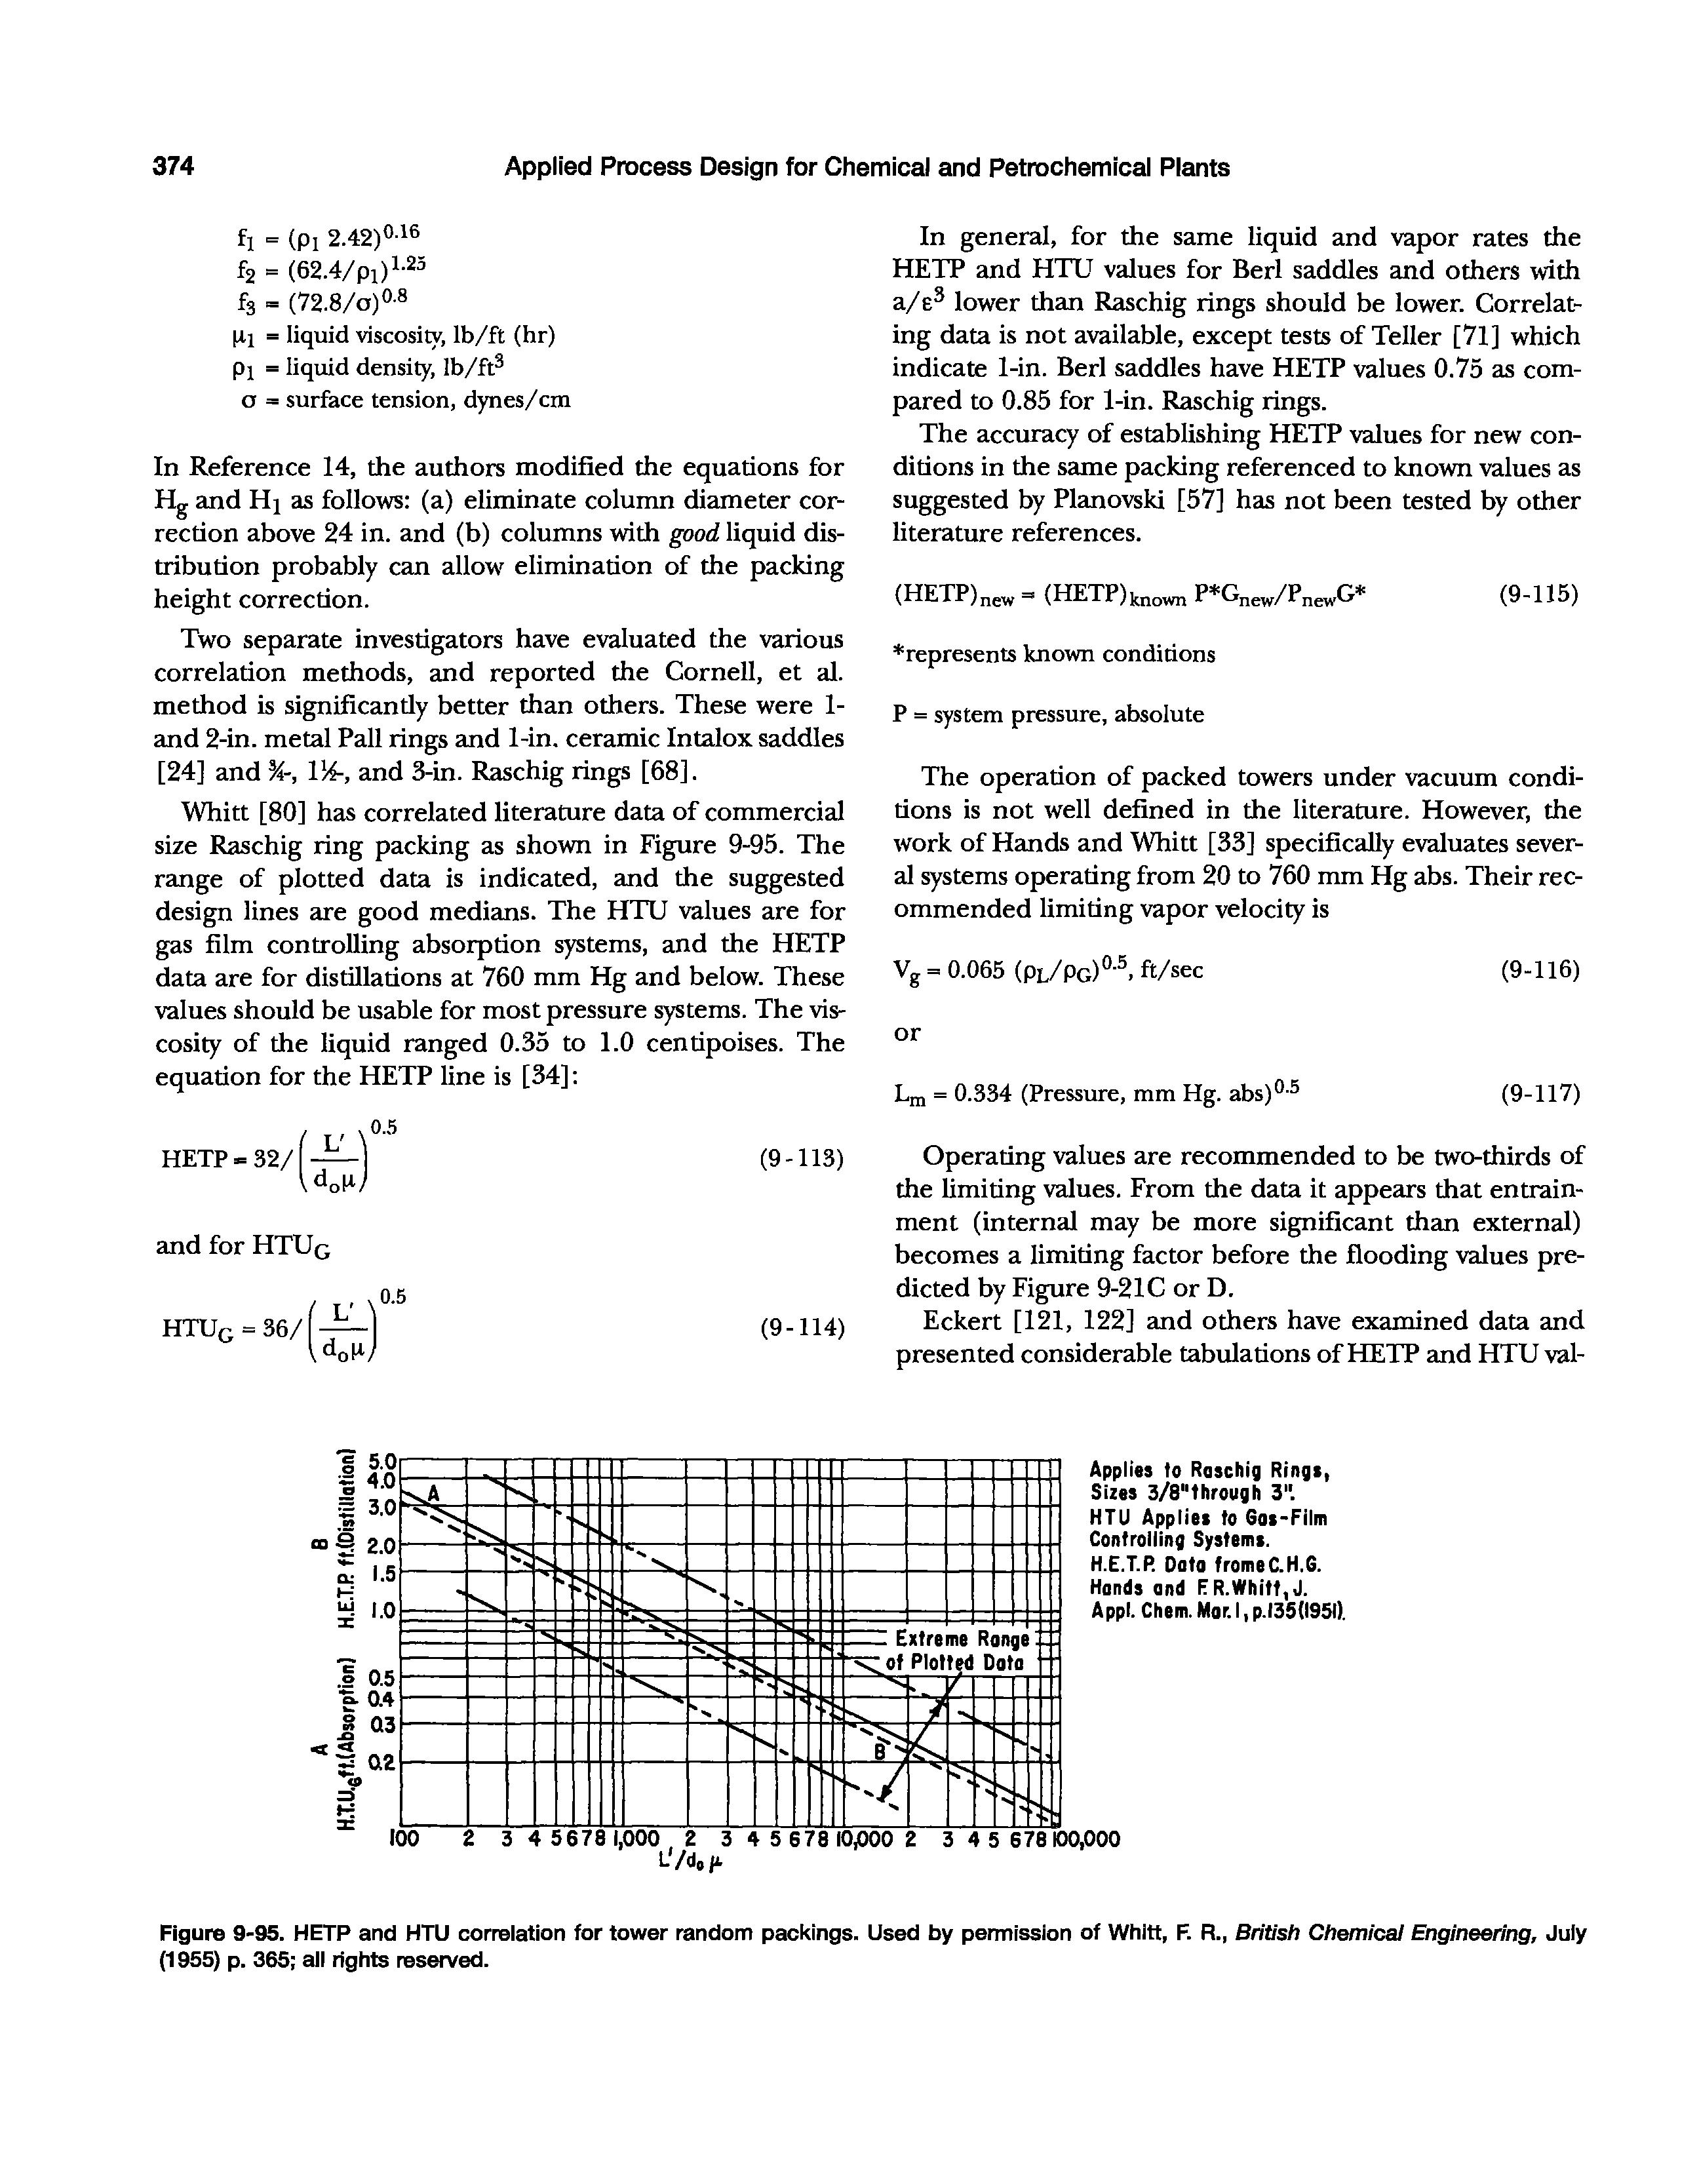 Figure 9-95. HETP and HTU correlation for tower random packings. Used by permission of Whitt, F. R., British Chemical Engineering, July (1955) p. 365 all rights reserved.